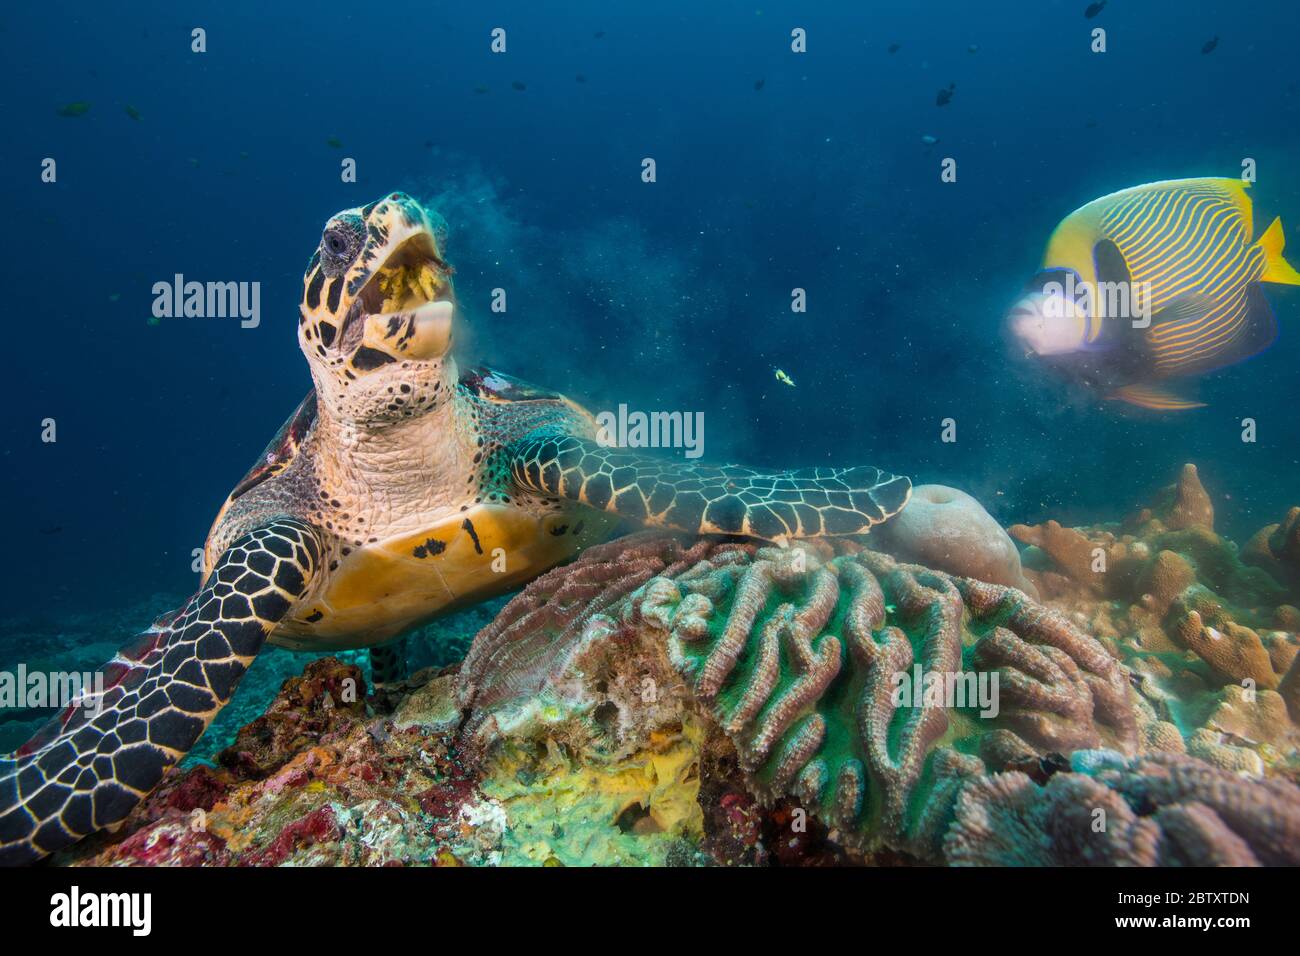 A Hawksbill turtle resting on coral eating a sponge, next to an Emperor Angelfish, at Nusa Penida, Bali, Indonesia. Stock Photo